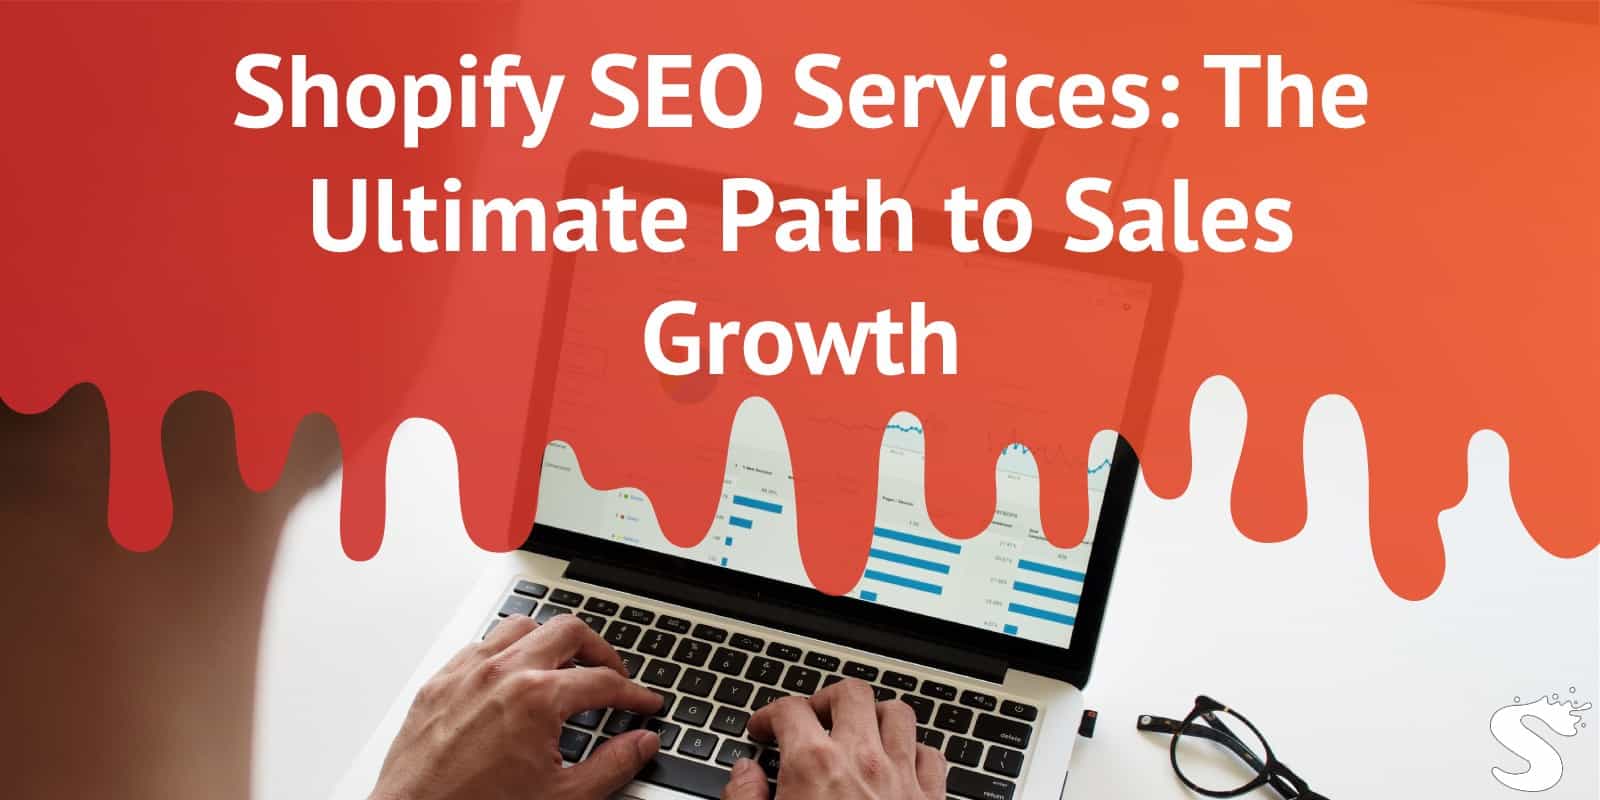 Shopify SEO Services: The Ultimate Path to Sales Growth